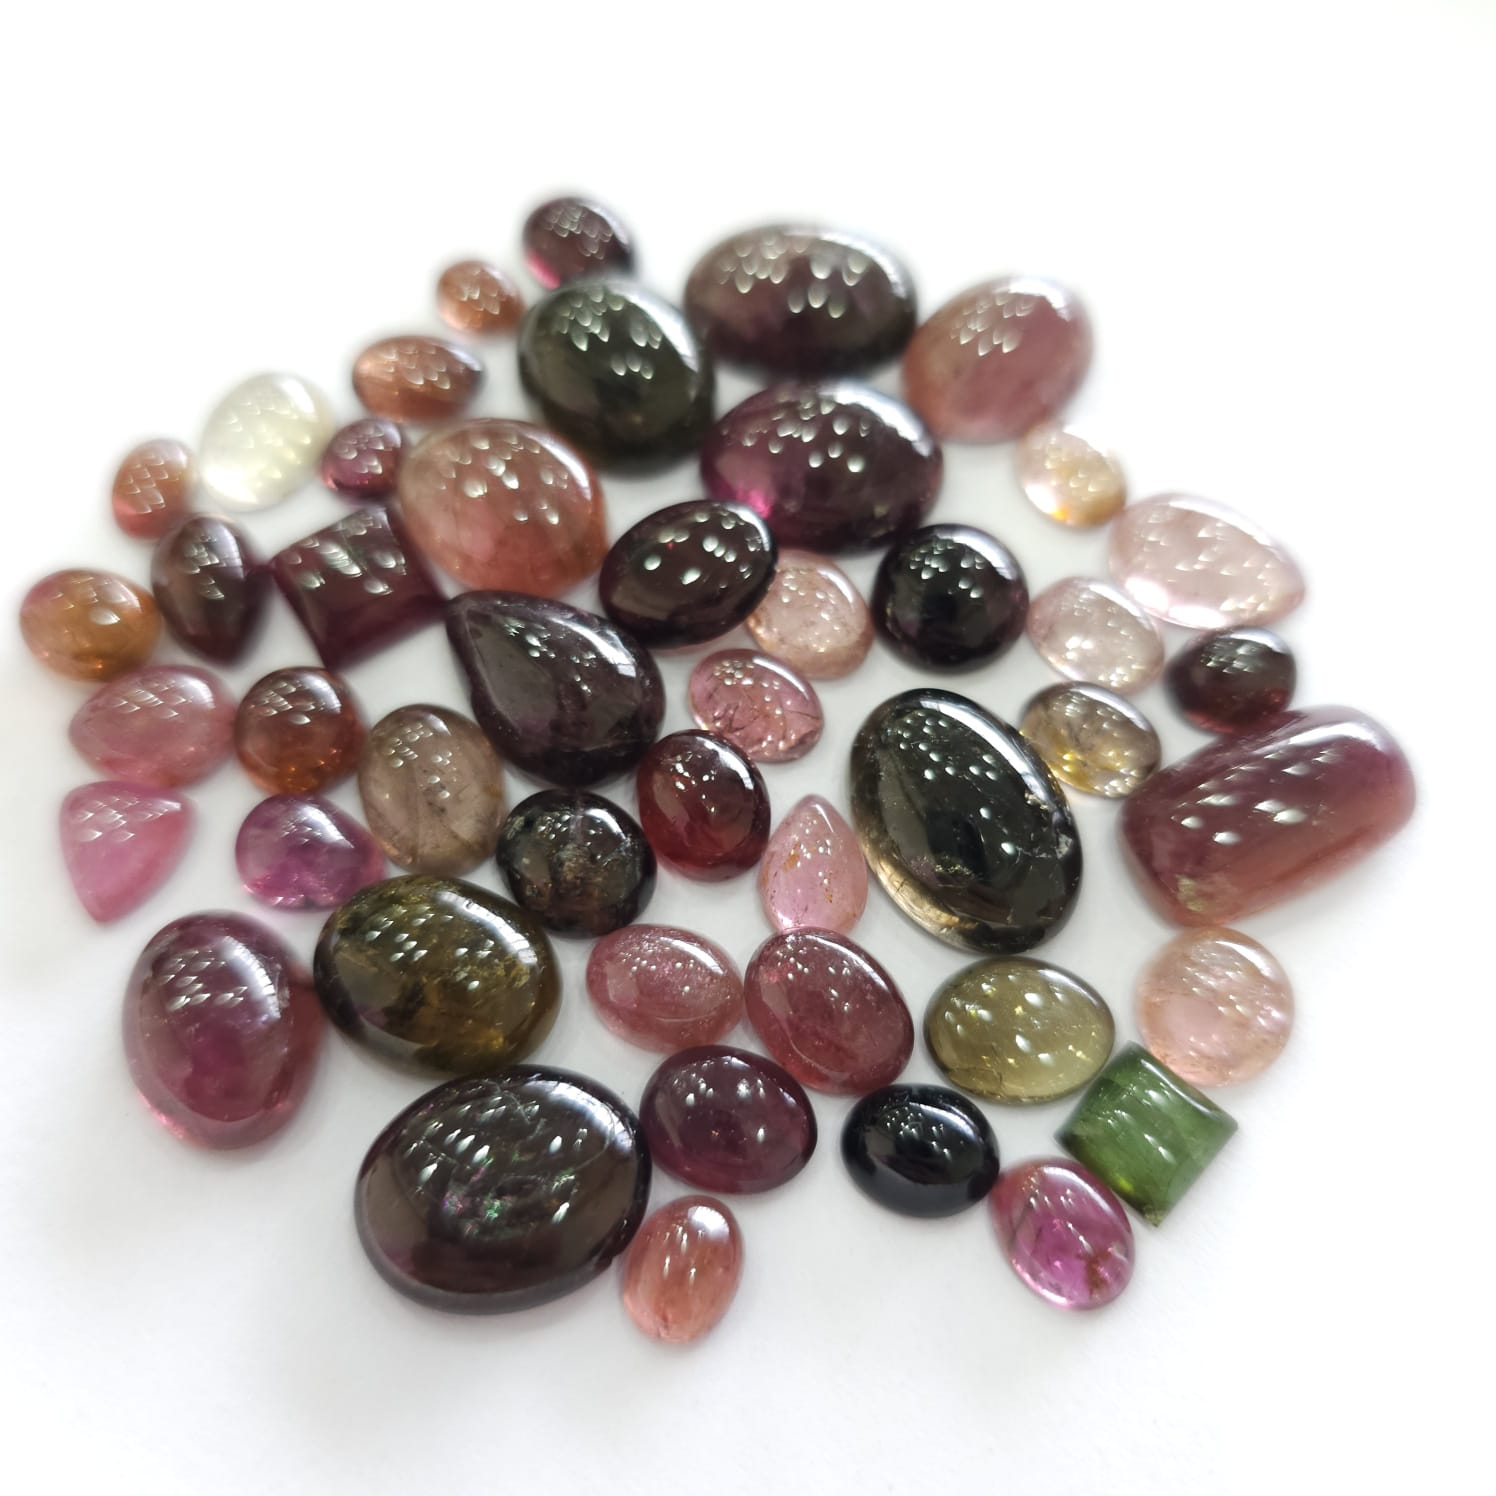 Wholesale Lot: 47 Pcs Natural Tourmaline Multi Colour Cabochon 6-17mm | 184 Cts | African Mined Untreated - The LabradoriteKing